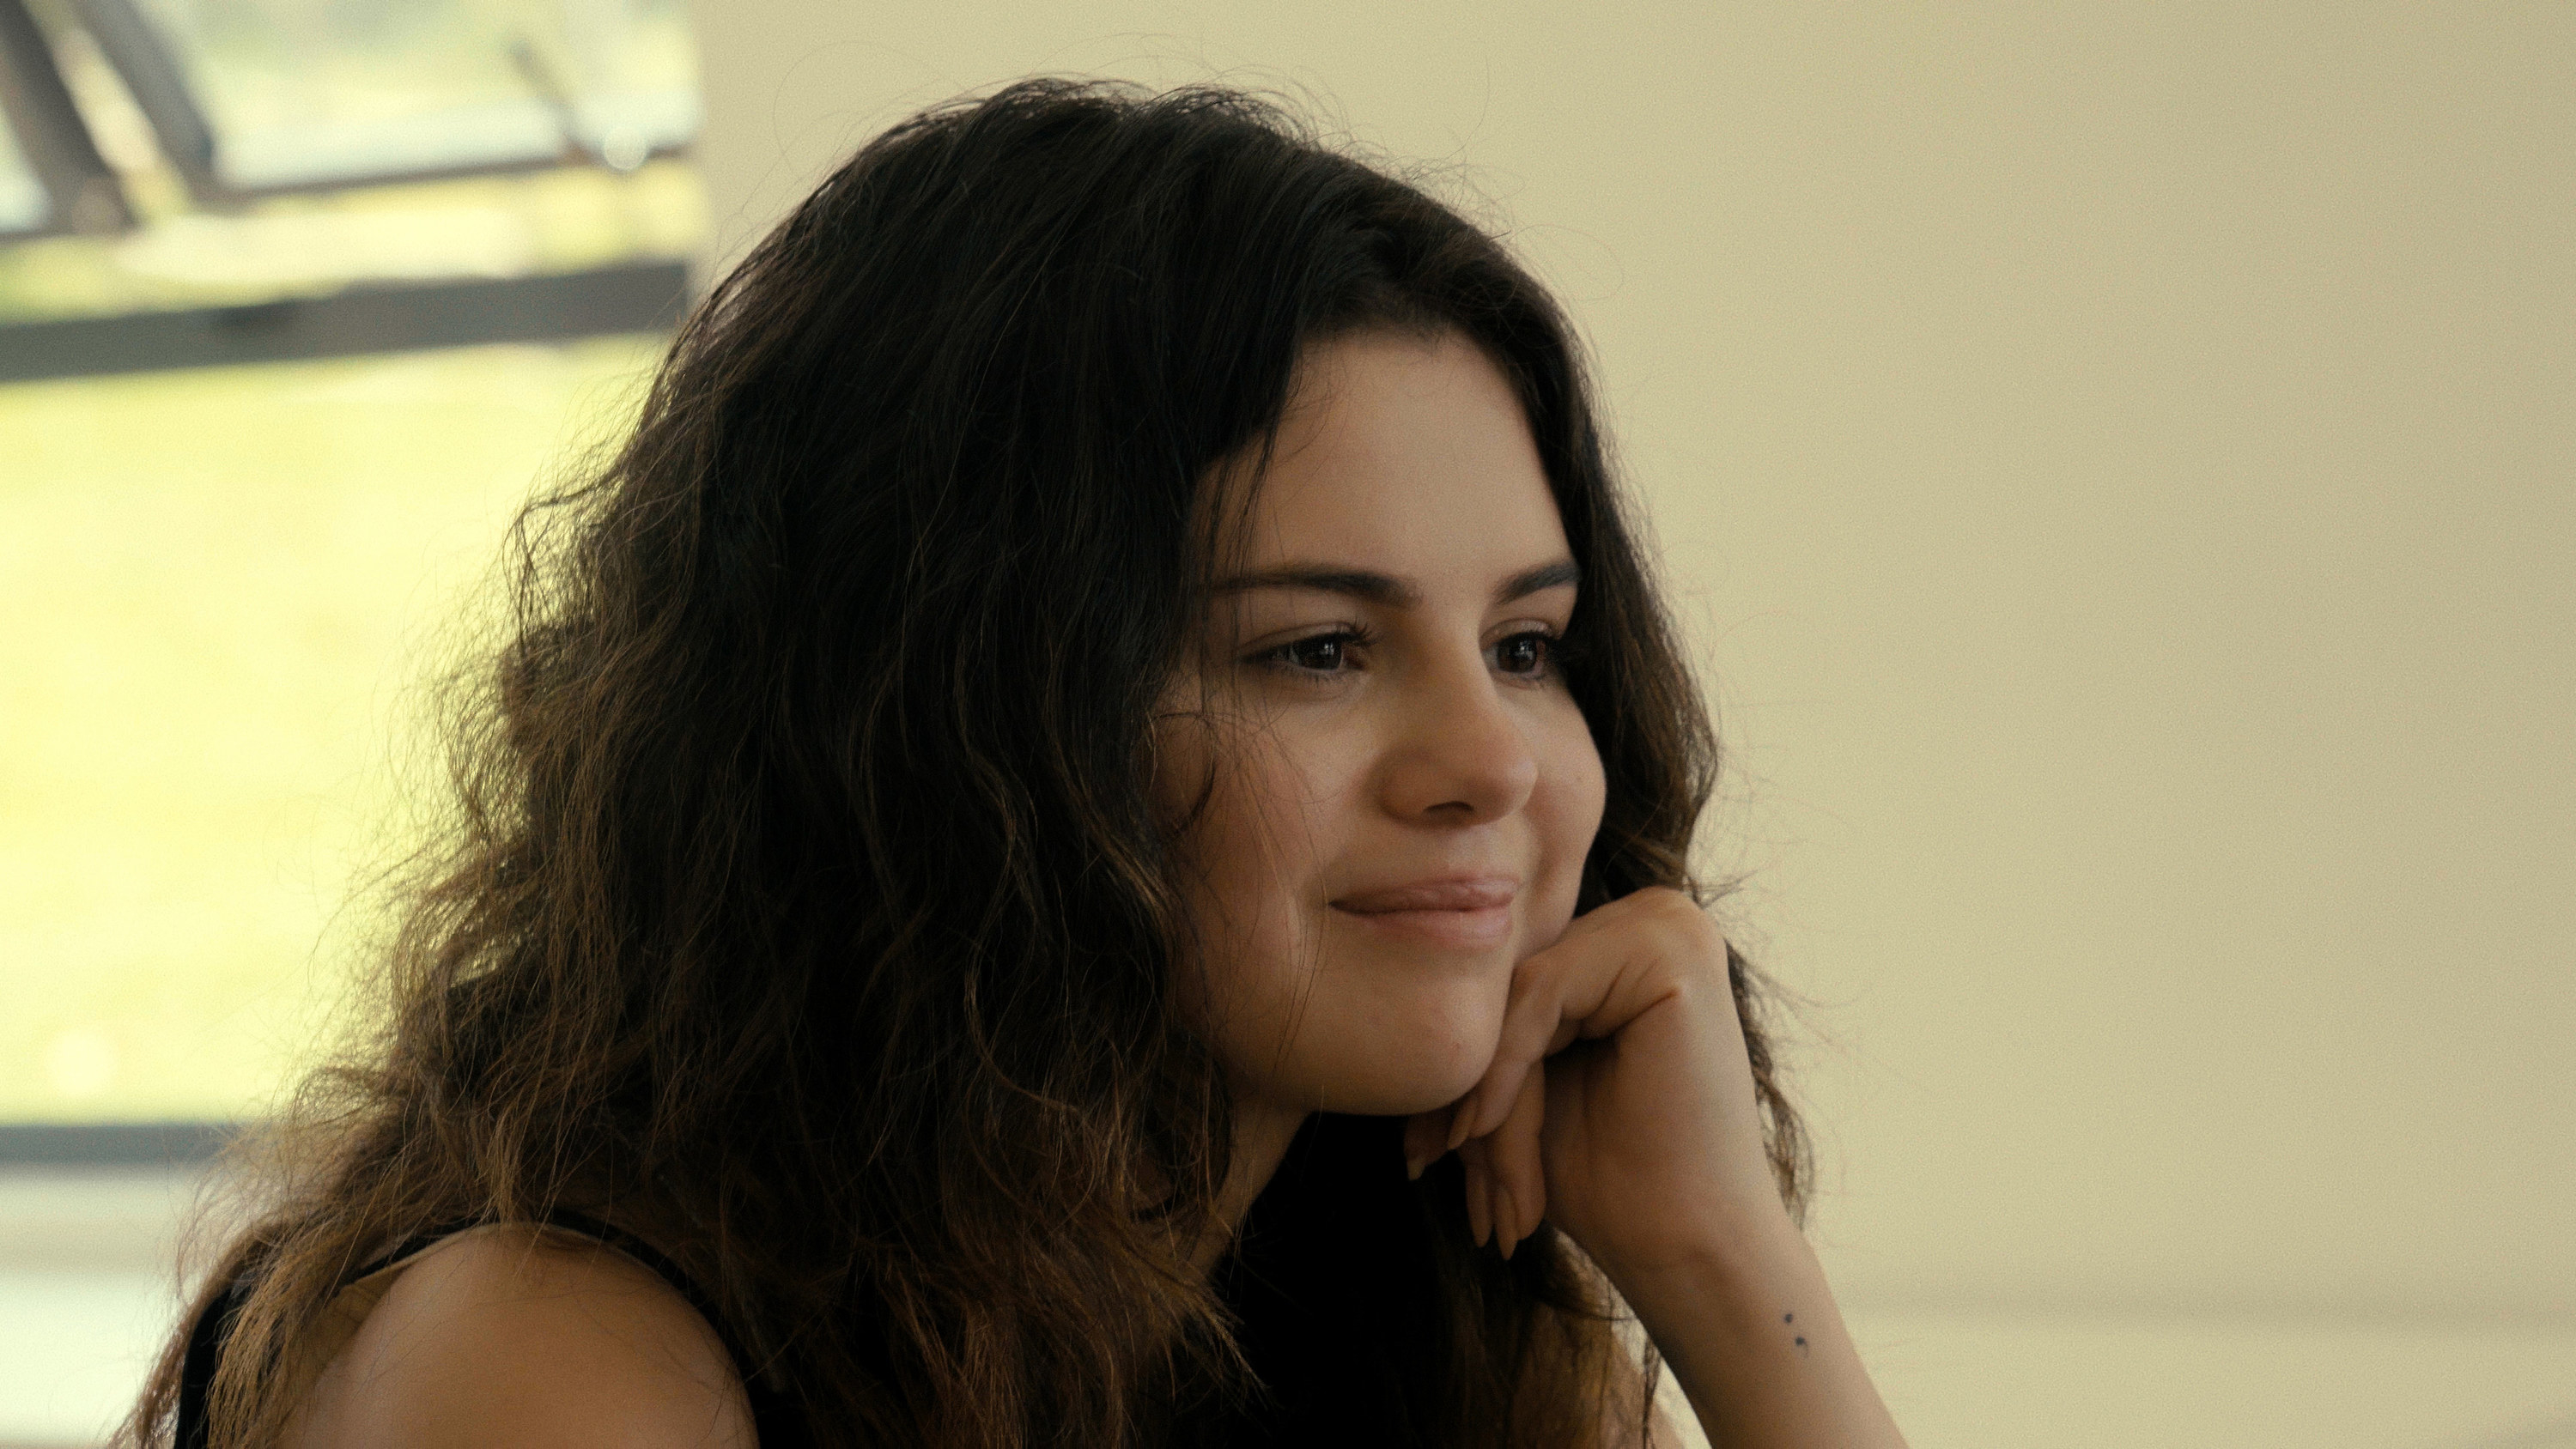 Selena Gomez smiles with her hand near her face